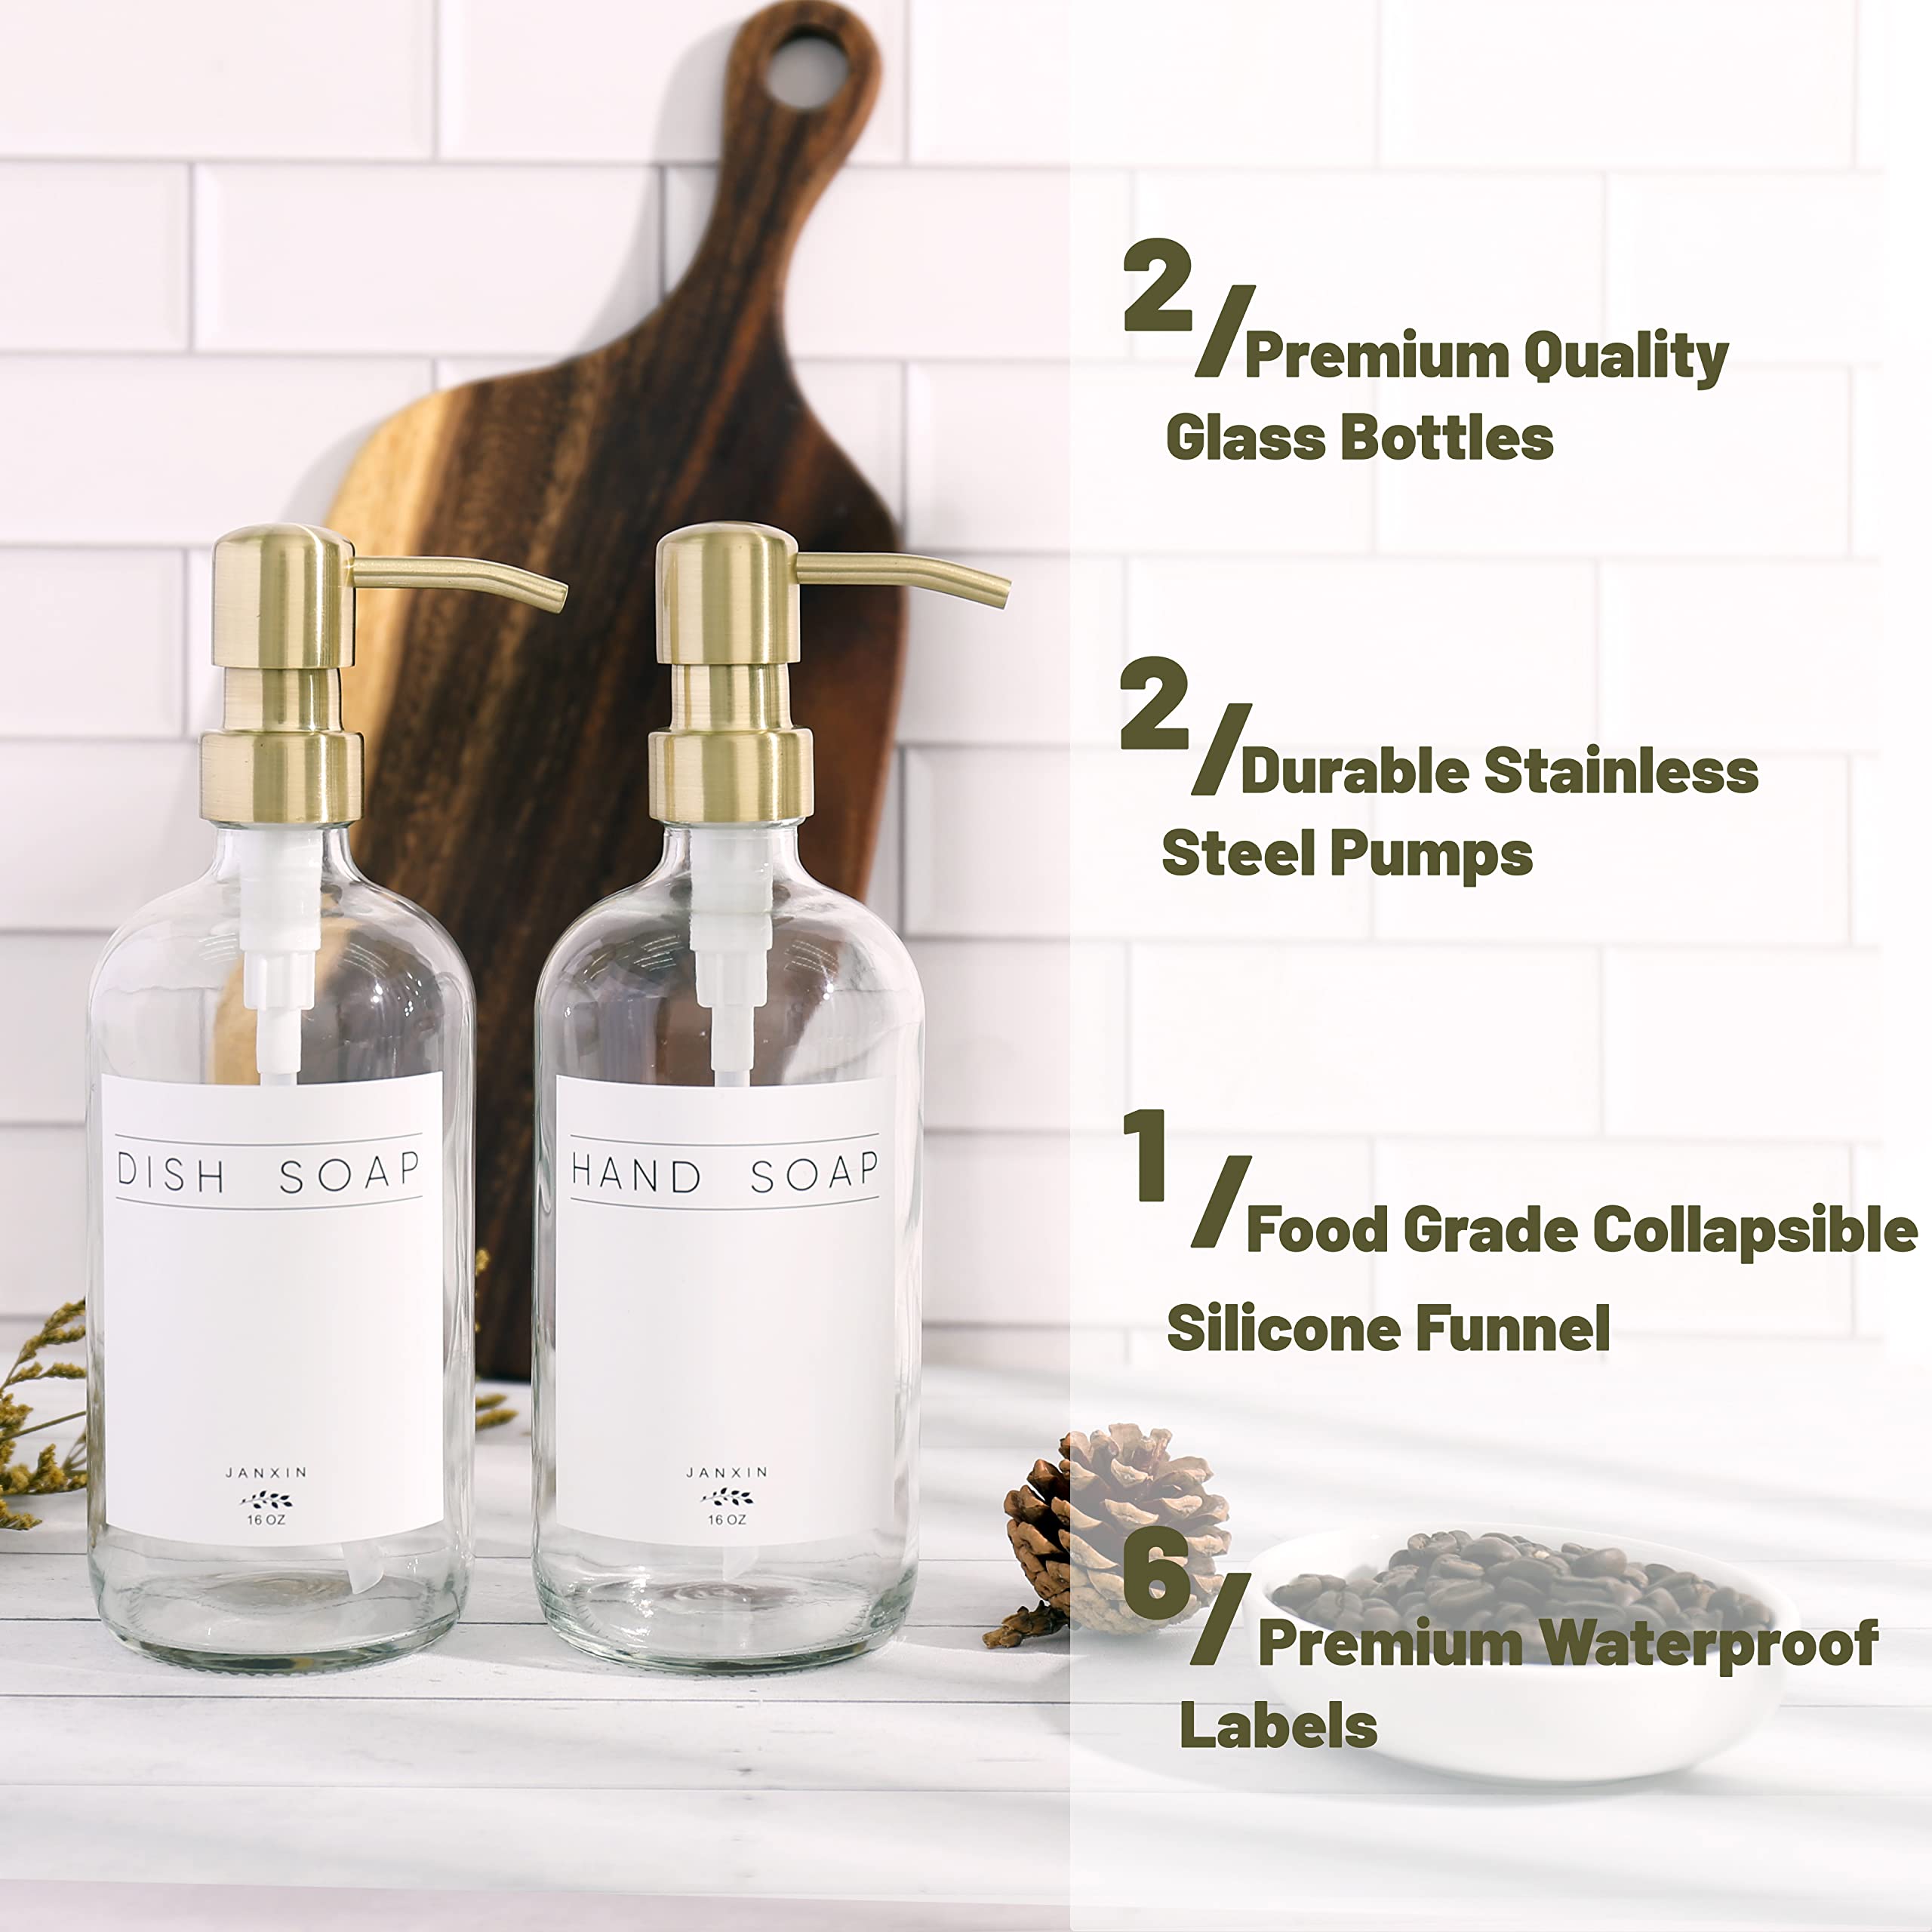 Janxin Glass Soap Dispenser 2 Pack,Dish Soap Dispenser for Kitchen Sink with Pump,Modern Bathroom Soap Dispenser with Waterproof Labels for Hand Soap, Dish Soap, Lotion (Clear Bottles+Gold Pumps)